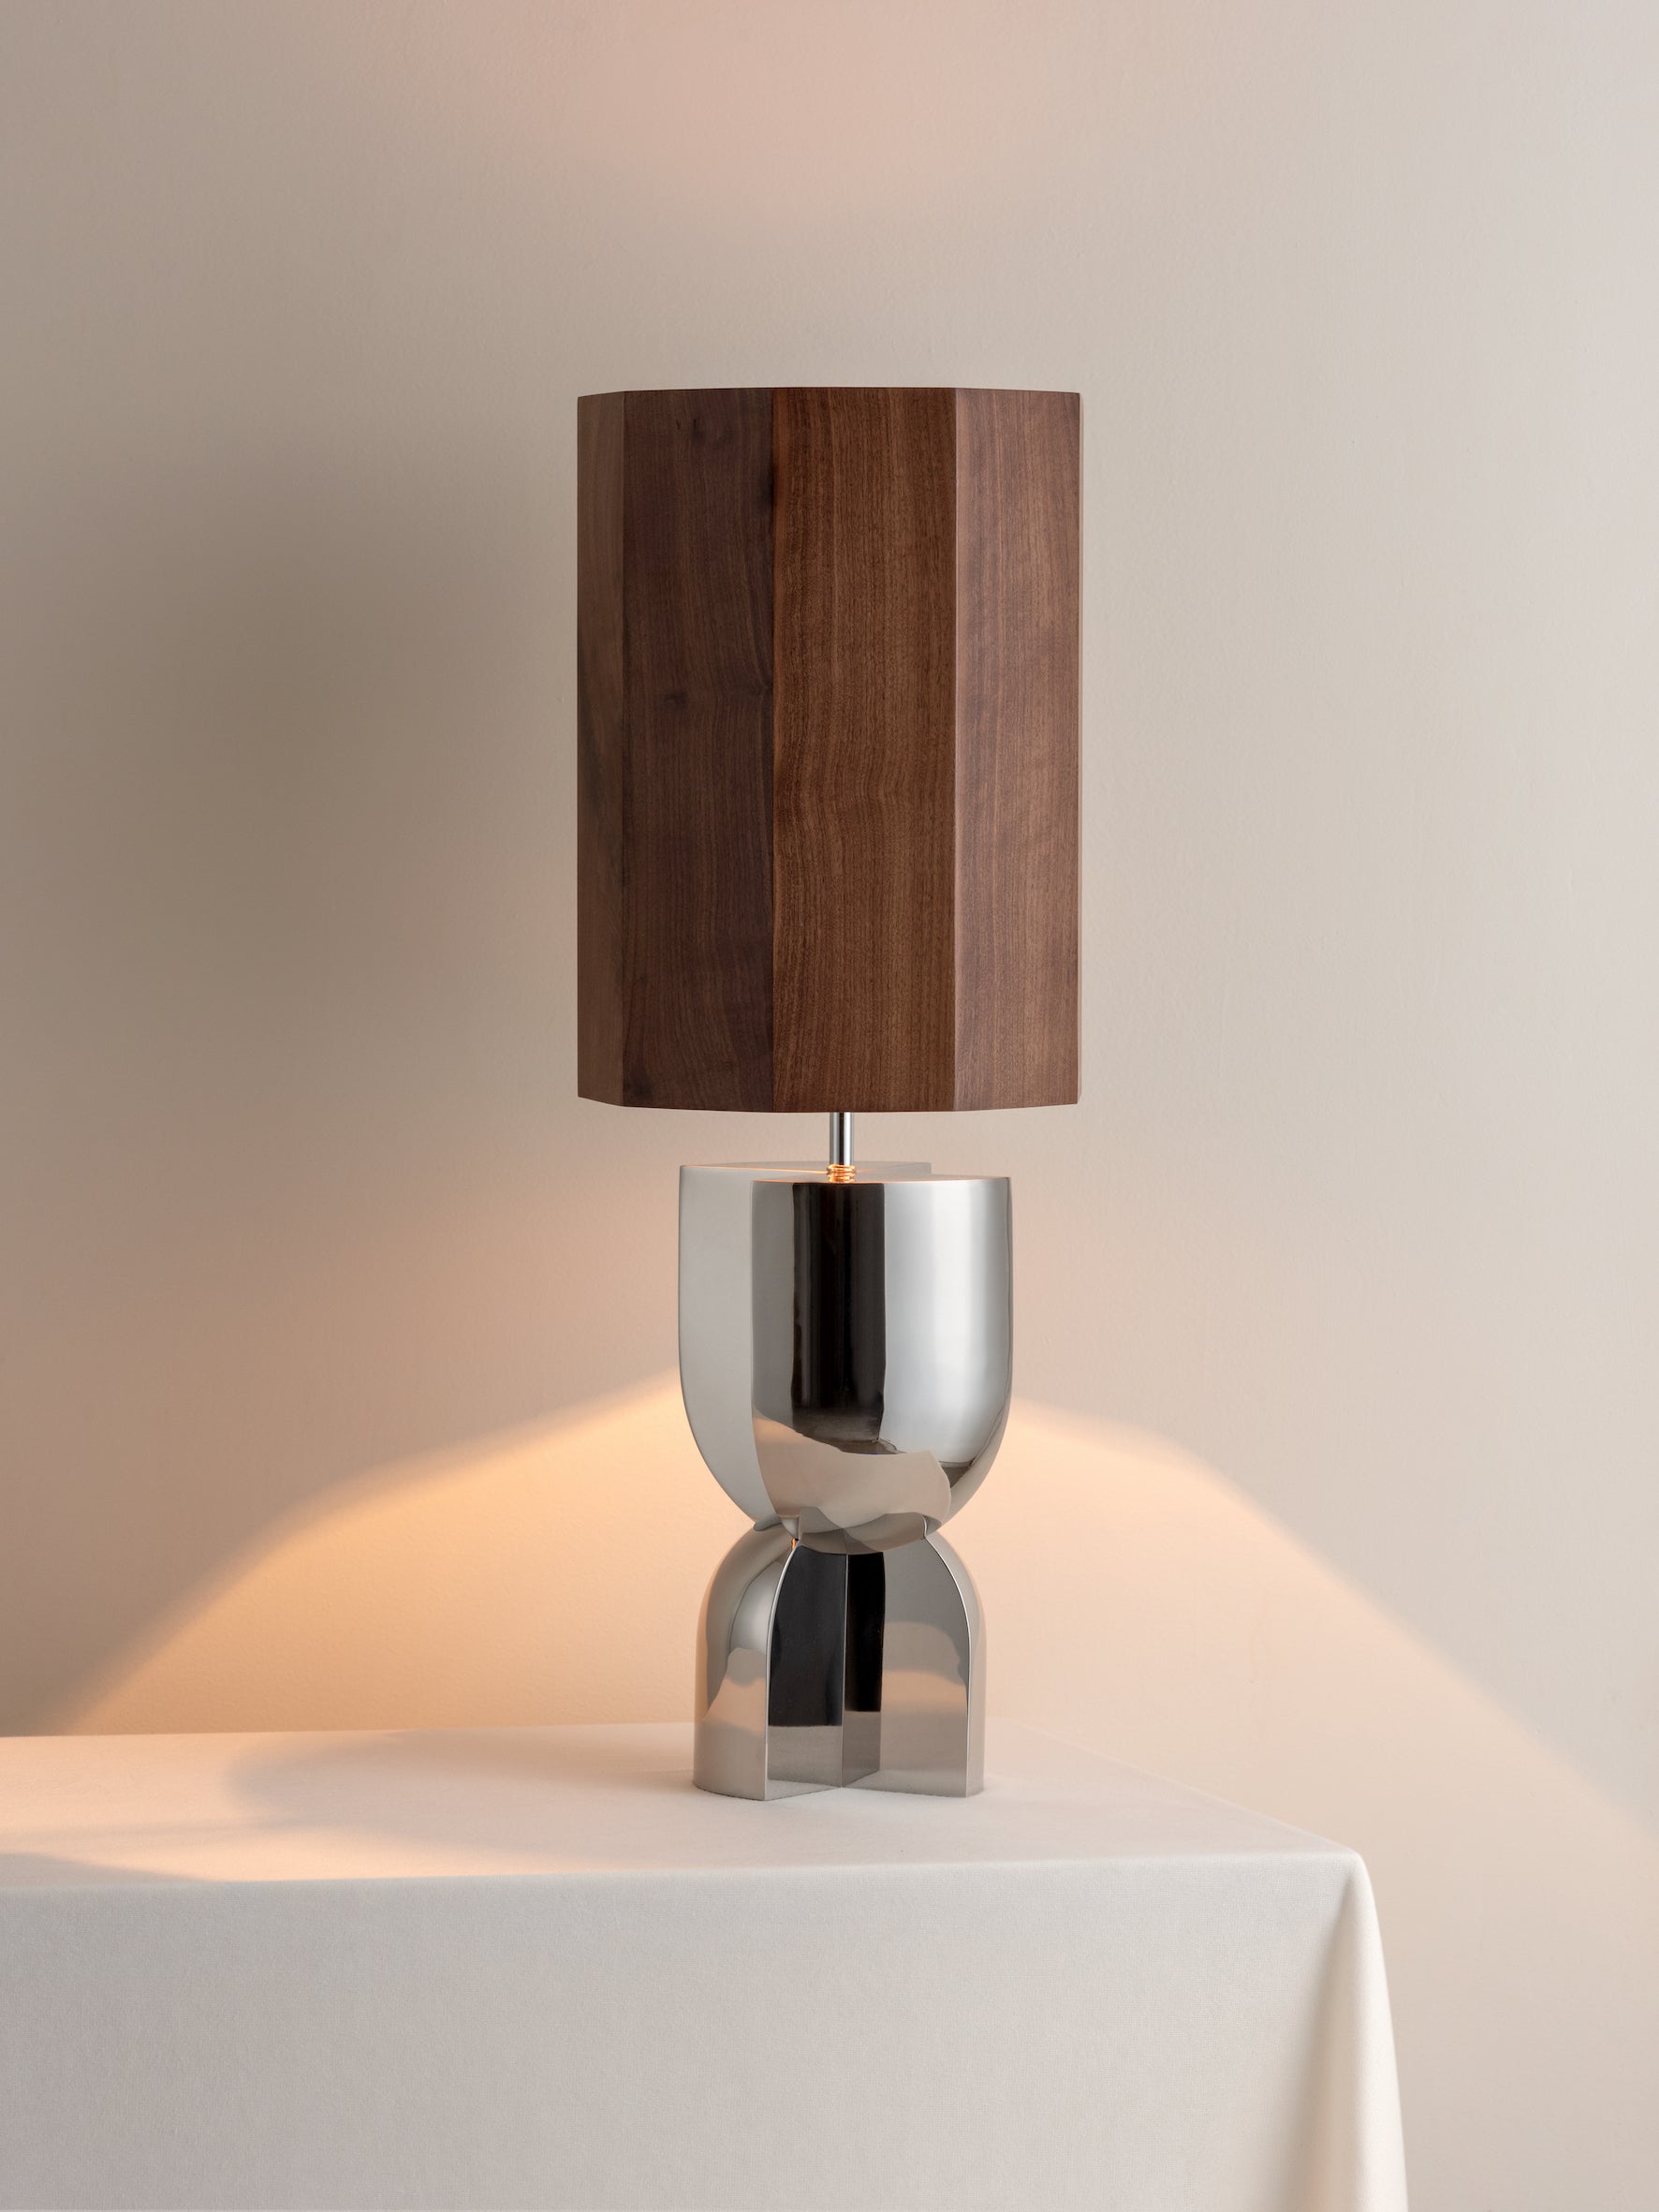 Editions chrome lamp with + walnut wood shade | Table Lamp | Lights & Lamps | UK | Modern Affordable Designer Lighting